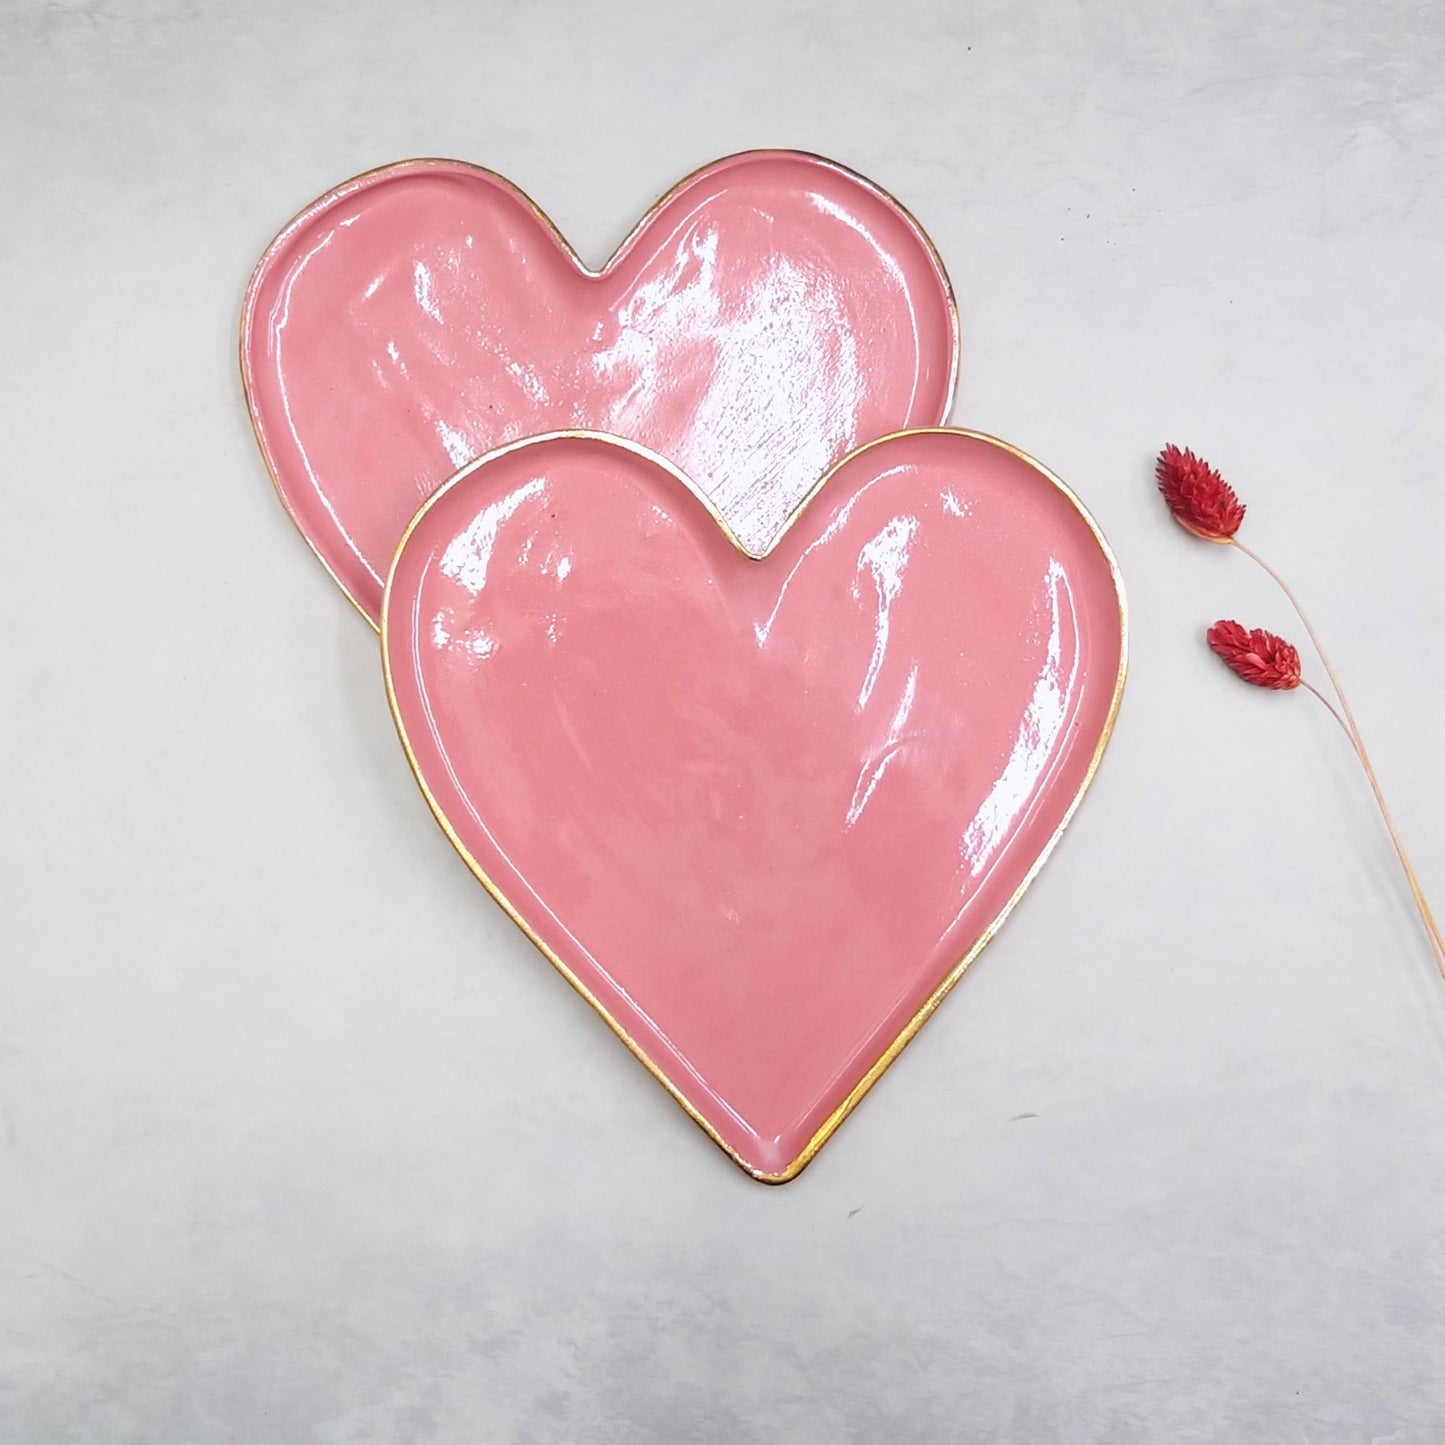 Two pink gold hearts shape ceramic plates 